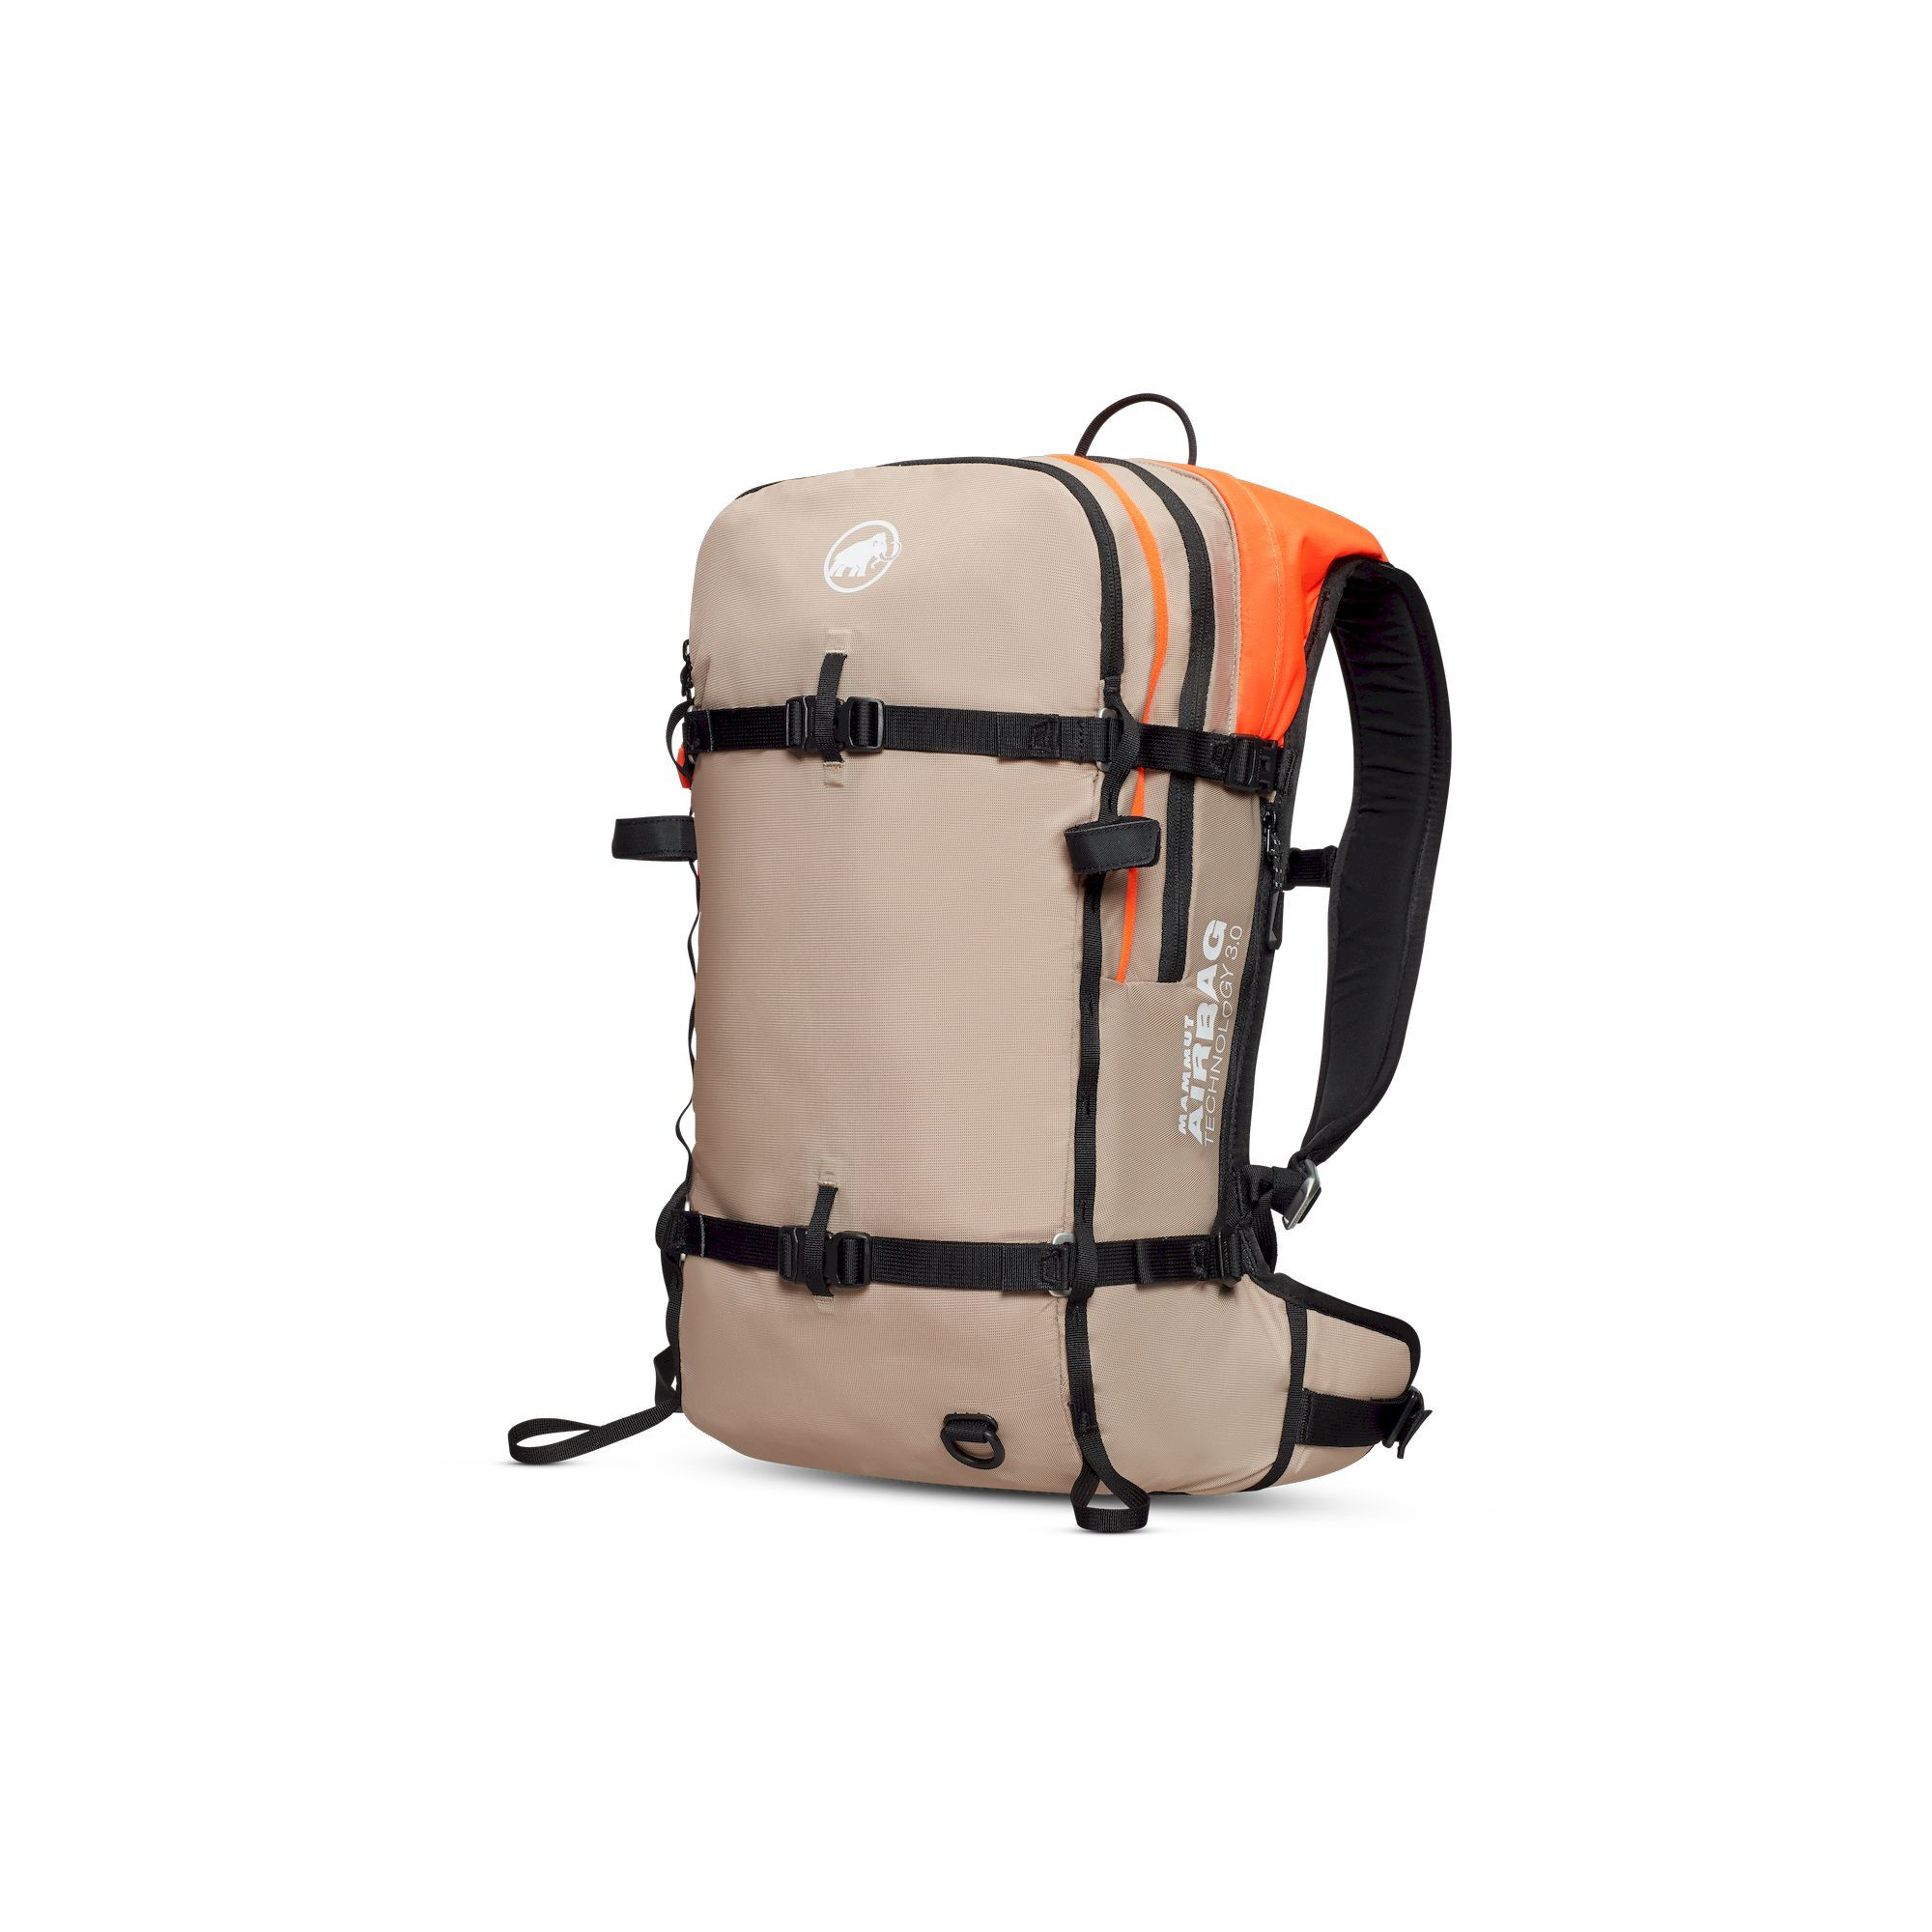 Mammut Free 22 Removable Airbag 3.0 - Avalanche airbag backpack